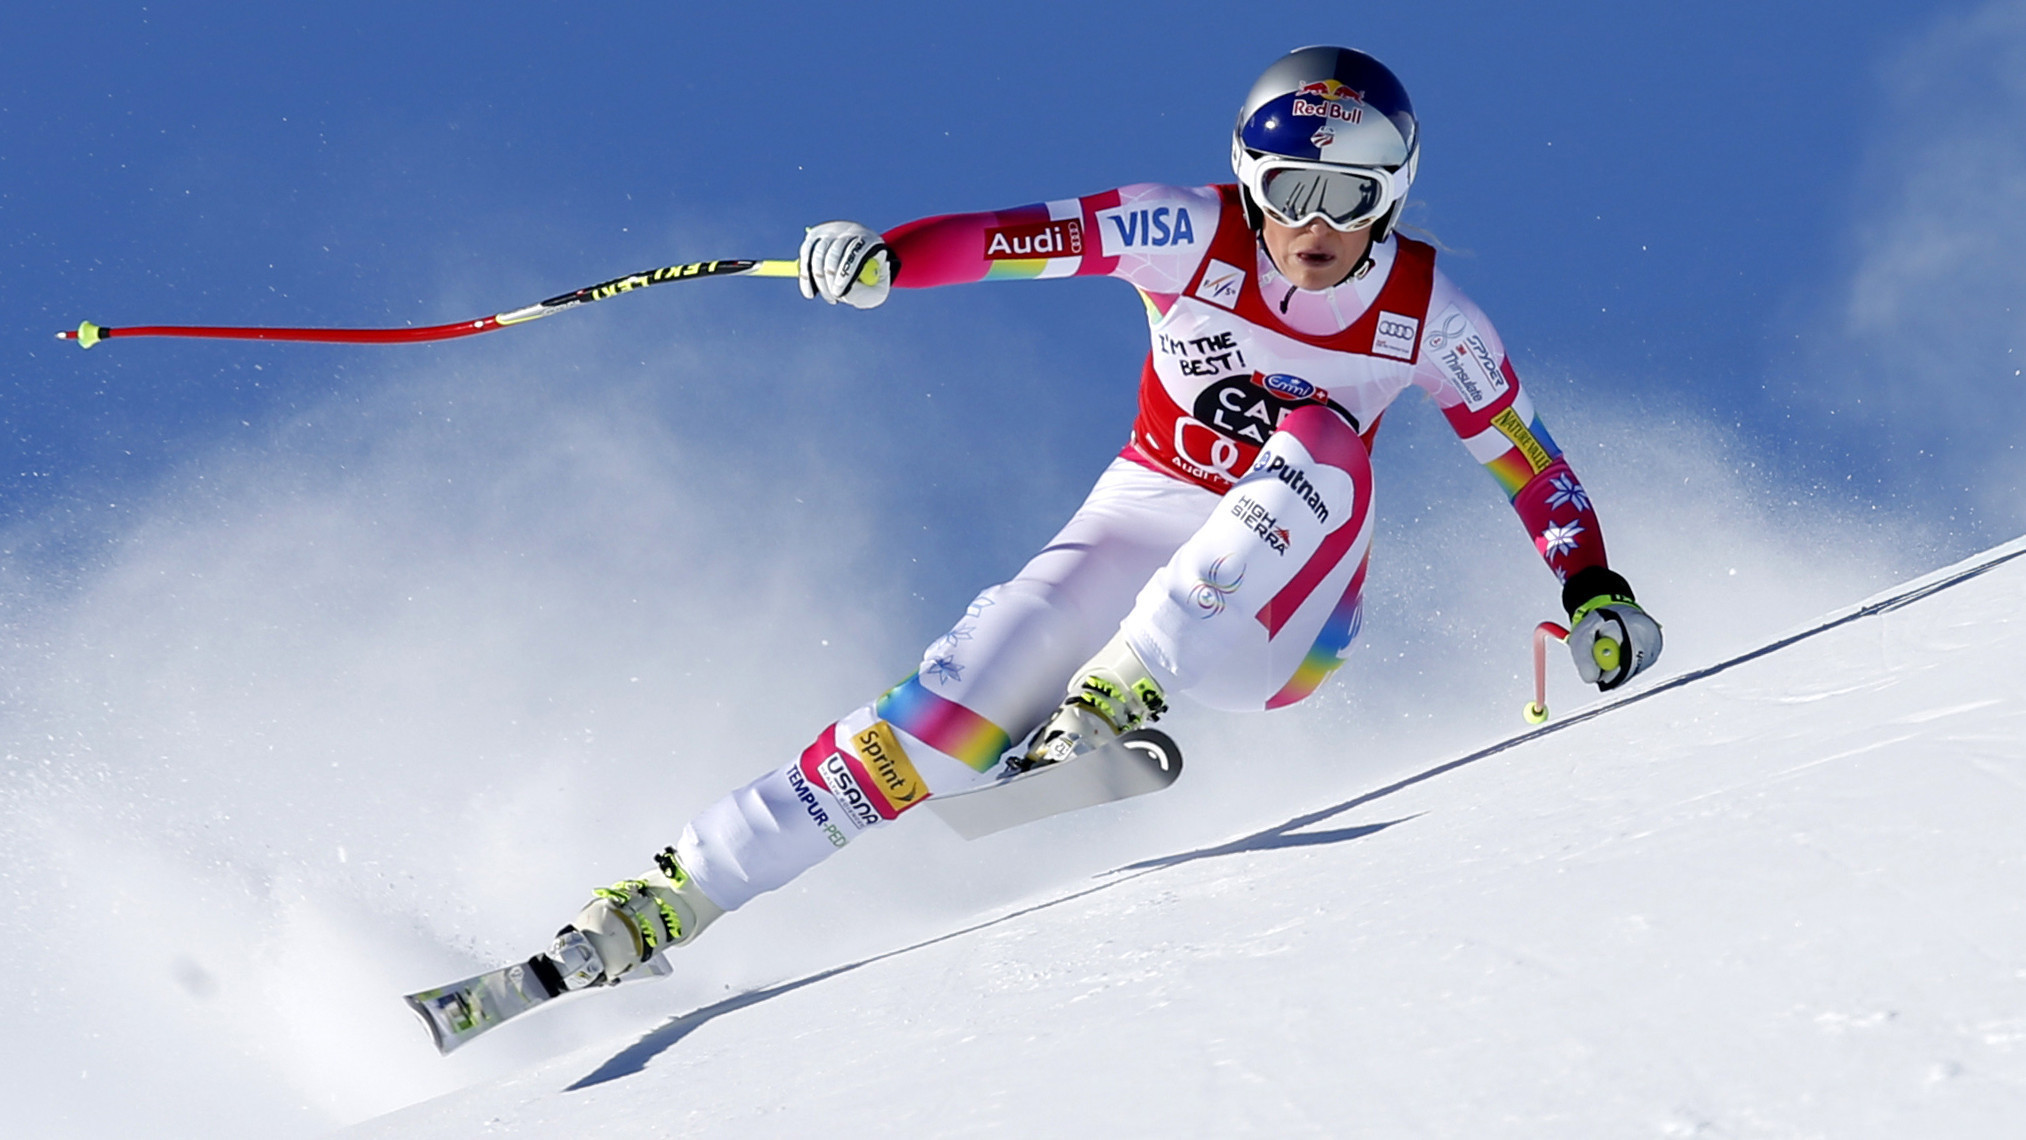 Lindsey Vonn crushing it on course in 2015.